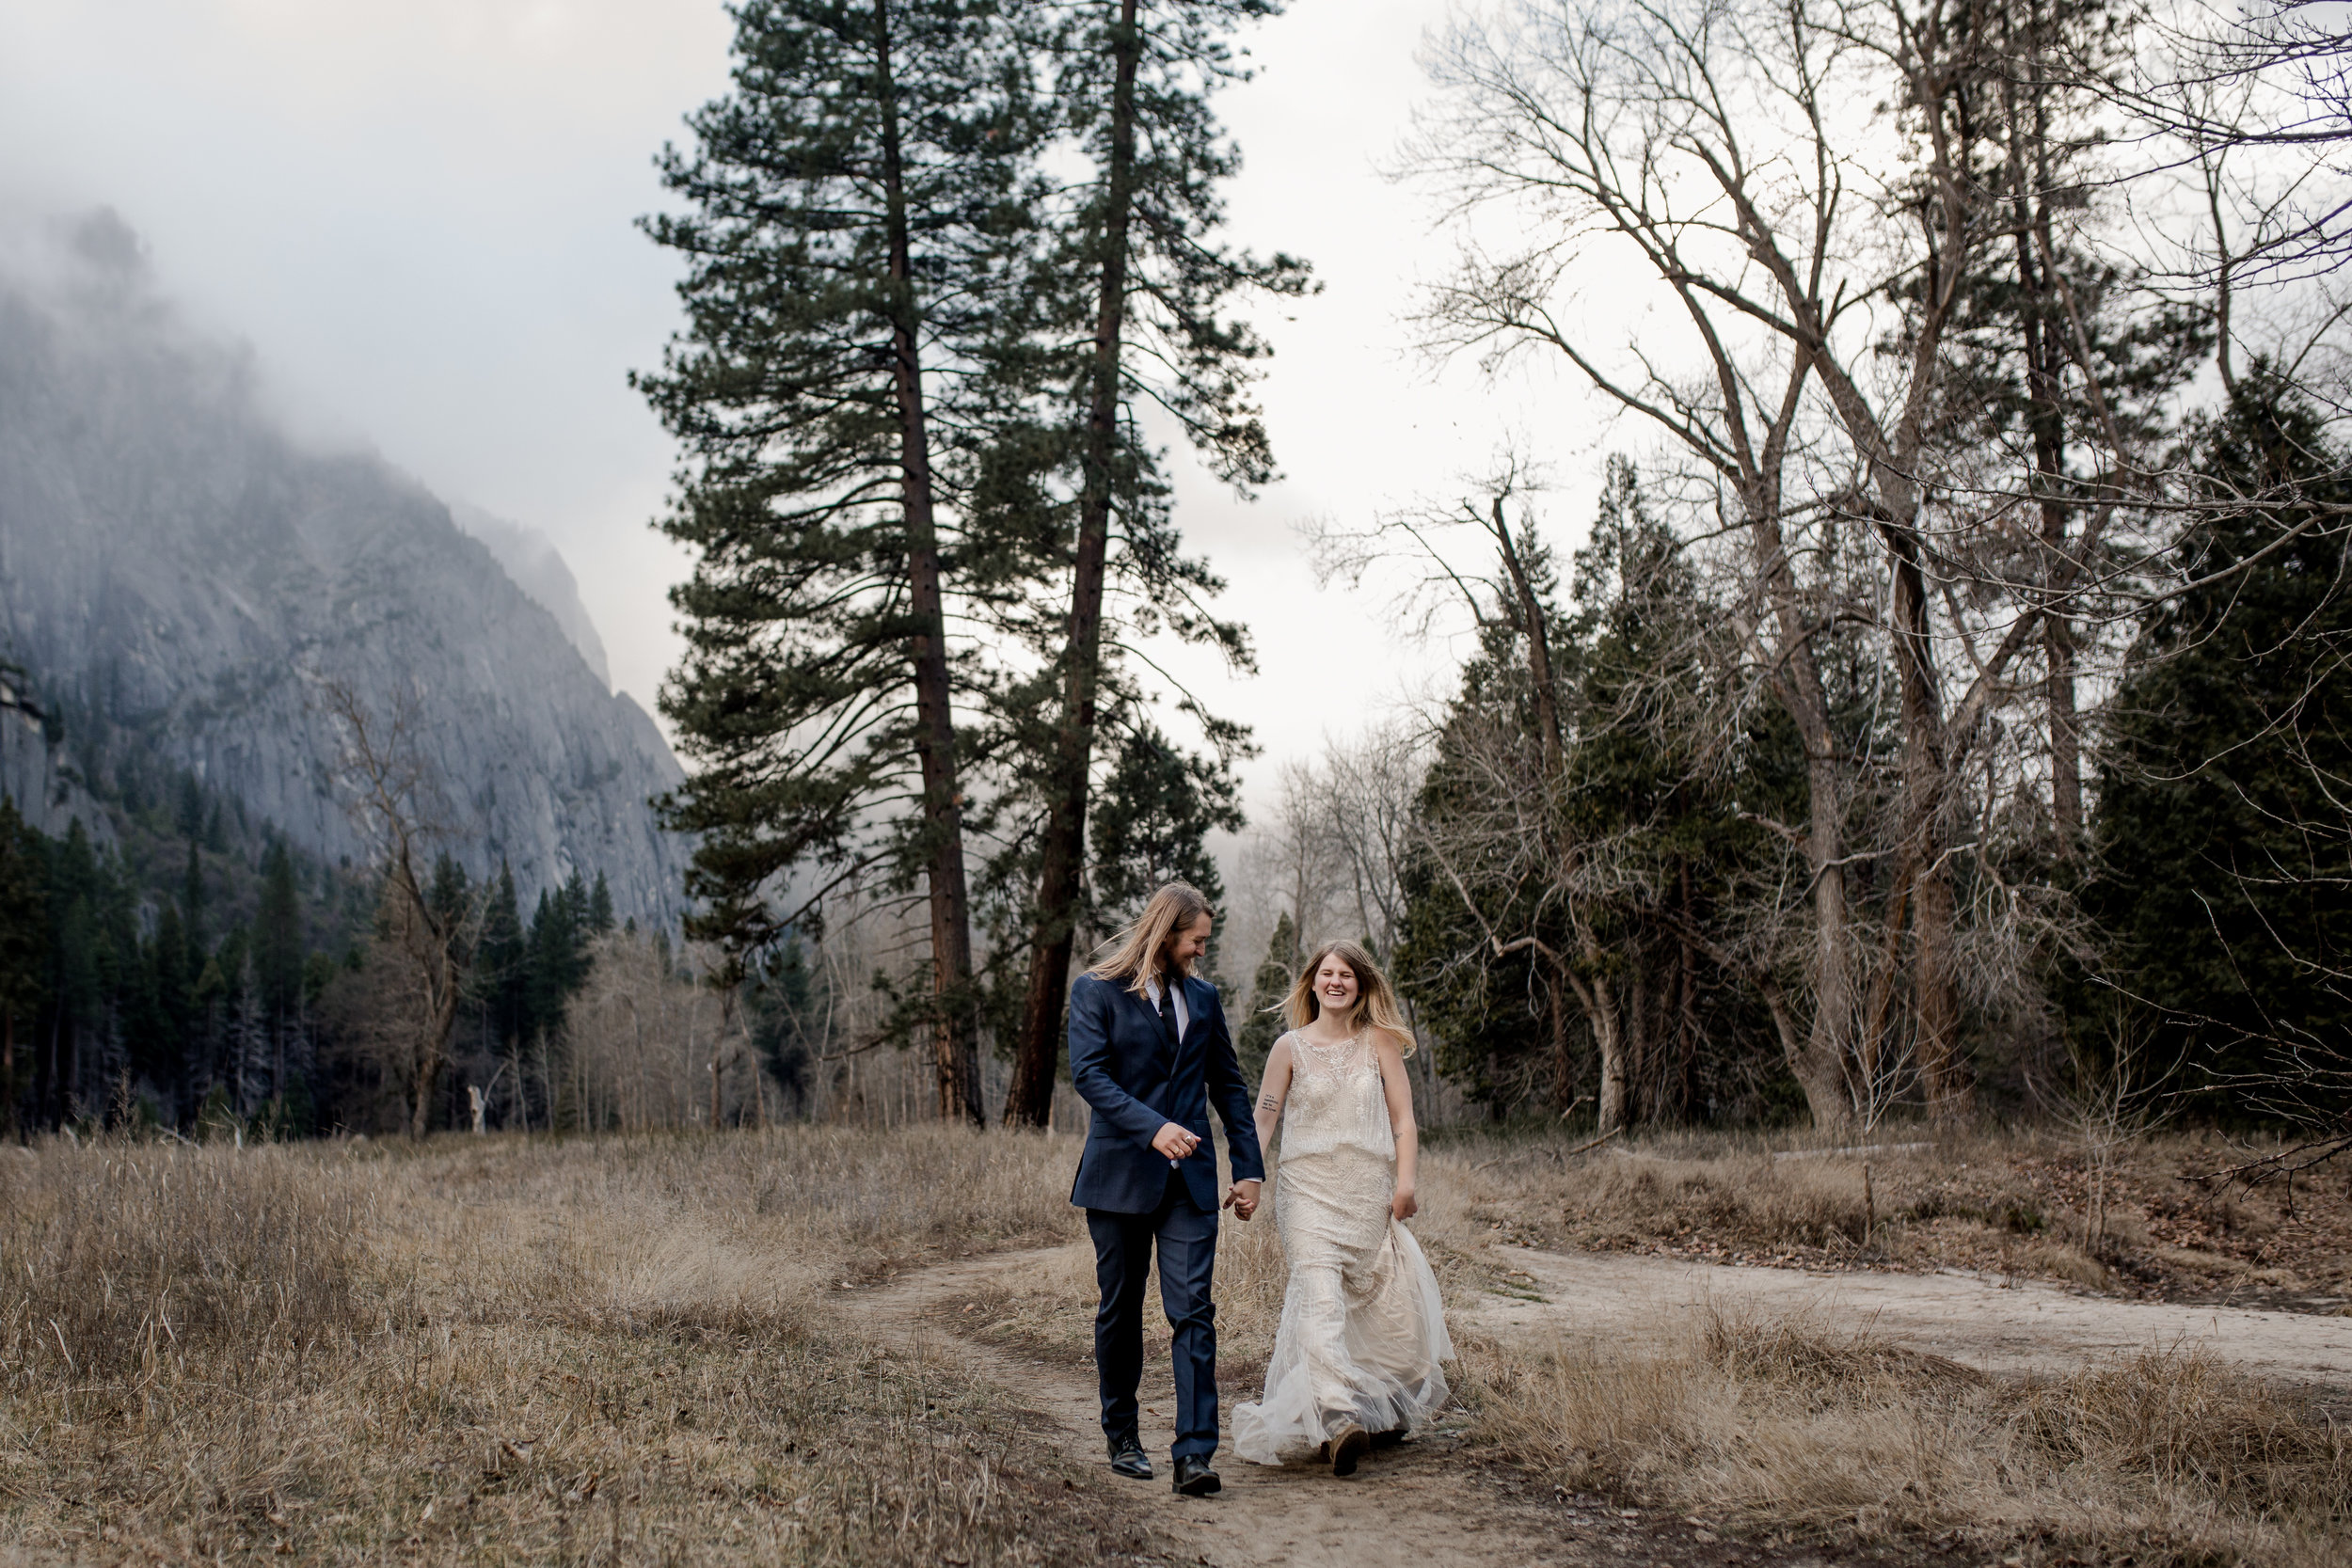 nicole-daacke-photography-yousemite-national-park-elopement-photographer-winter-cloud-moody-elope-inspiration-yosemite-valley-tunnel-view-winter-cloud-fog-weather-wedding-photos-61.jpg